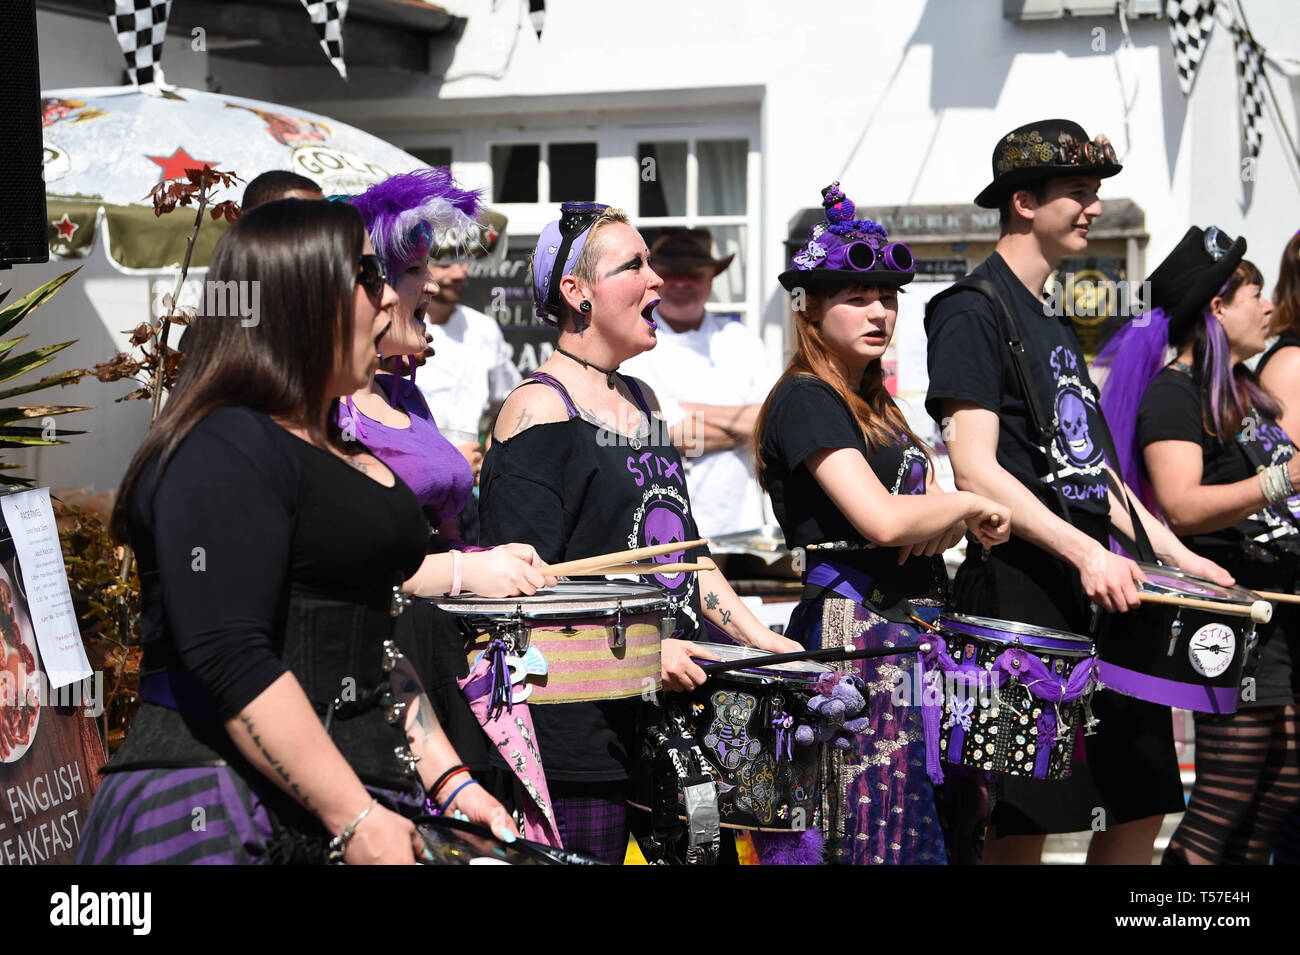 Bolney Sussex, UK. 22nd Apr, 2019. The Stix Drummers entertain the crowd at the annual Bolney Pram Race in hot sunny weather . The annual races start and finish at the Eight Bells Pub in the village every Easter Bank Holiday Monday Credit: Simon Dack/Alamy Live News Stock Photo